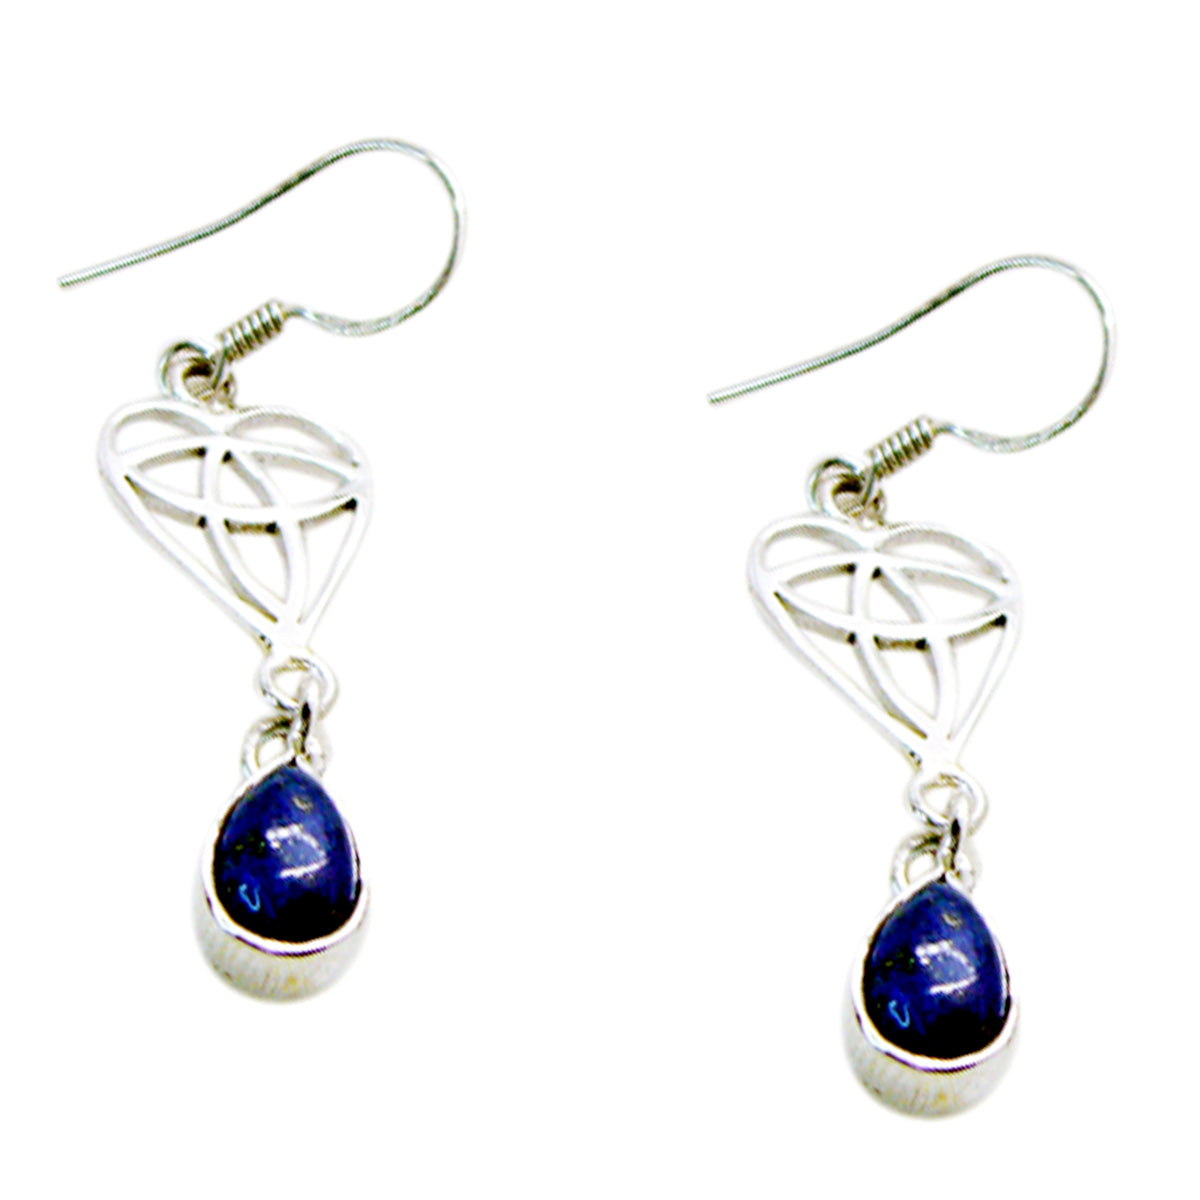 Riyo Real Gemstones Pear Cabochon Nevy Blue Lapis Lazuli Silver Earring gift for labour day